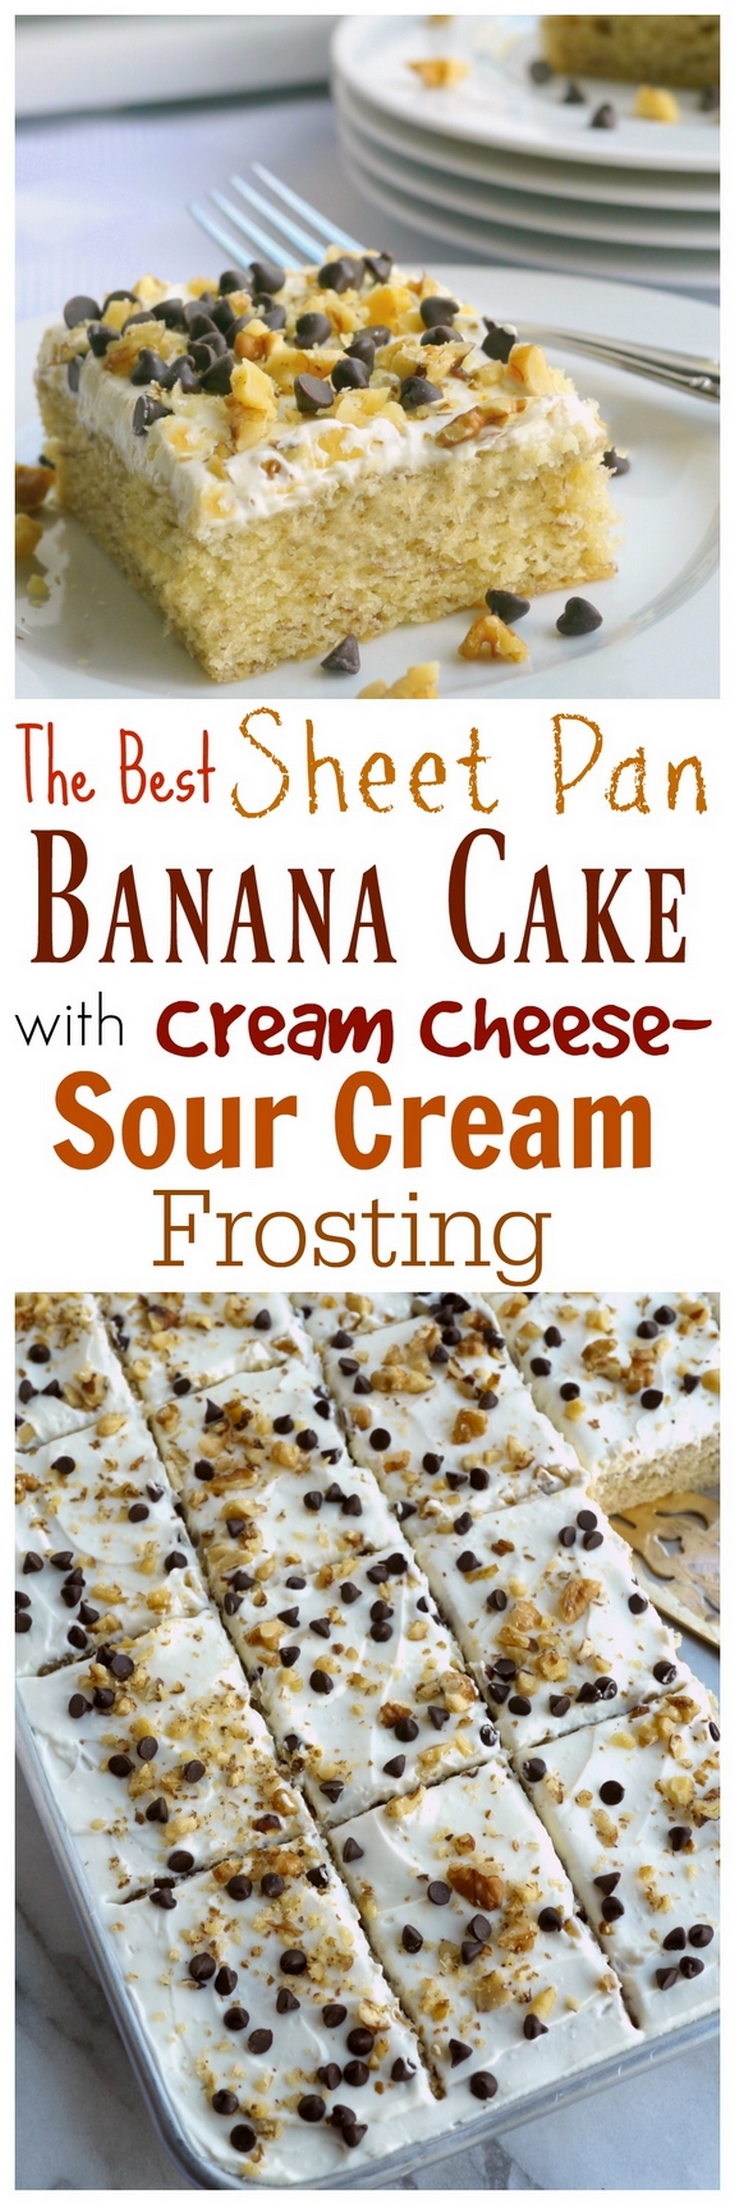 The Best Sheet Pan Banana Cake with Cream Cheese-Sour Cream Frosting is the perfect dessert to enjoy for your next gathering. 9 x 13 instructions also available.   via @cmpollak1